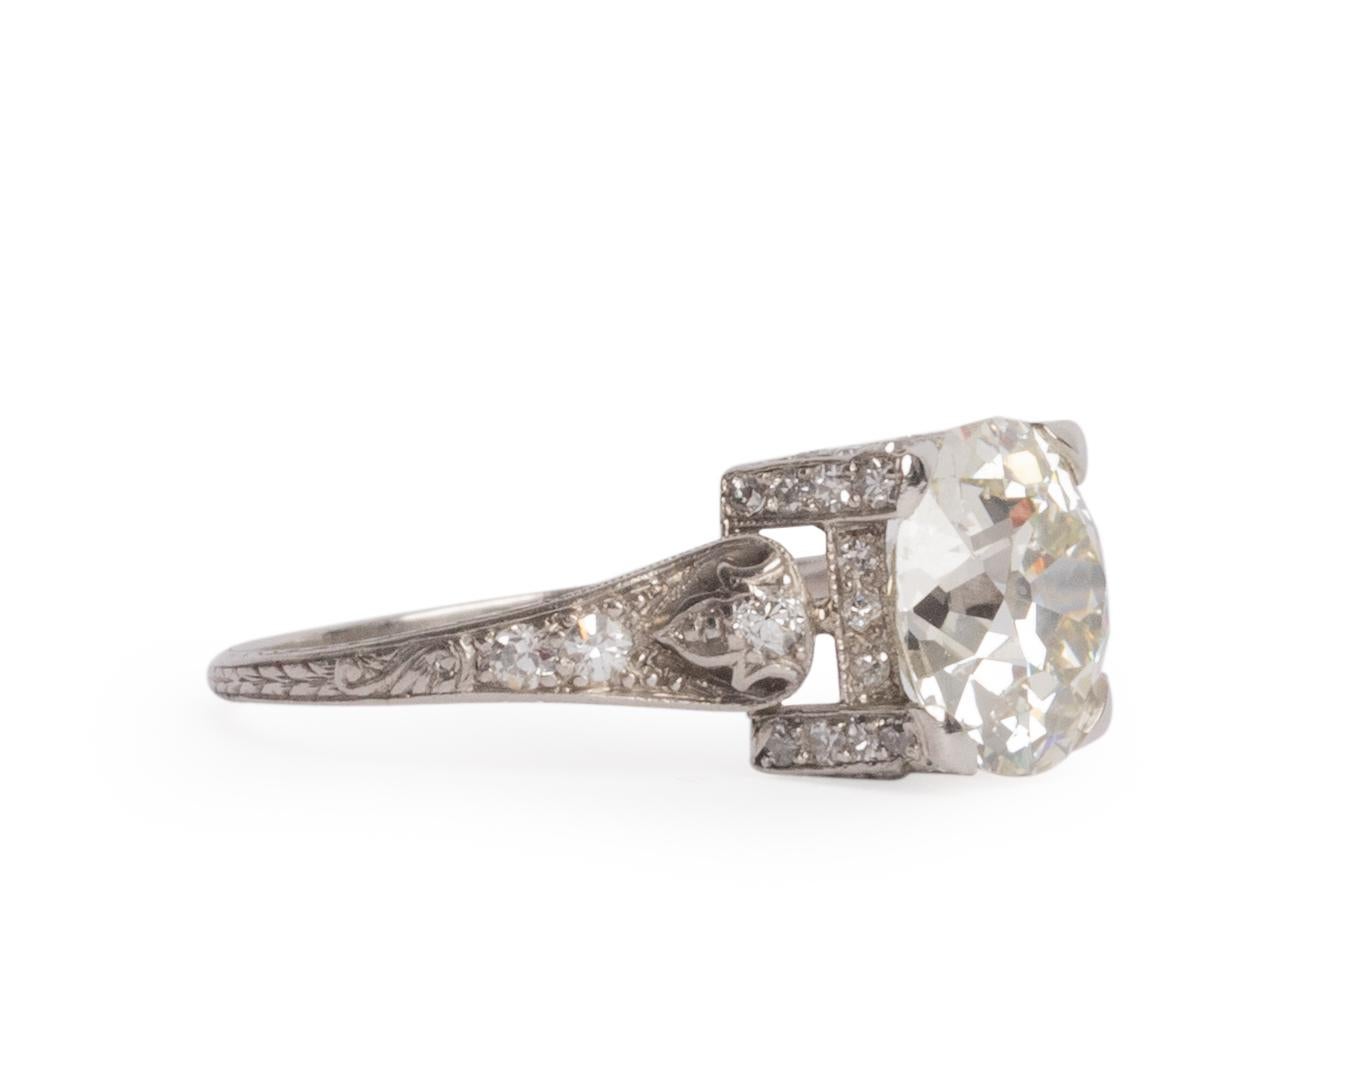 Ring Size: 6.5
Metal Type: Platinum  [Hallmarked, and Tested]
Weight:  3.45 grams

Center Diamond Details:
GIA REPORT #:2215072482
Weight: 2.60 carat
Cut: Antique Cushion - Old Mine Brilliant
Color: M
Clarity: SI2

Side Diamond Details:
Weight: .25